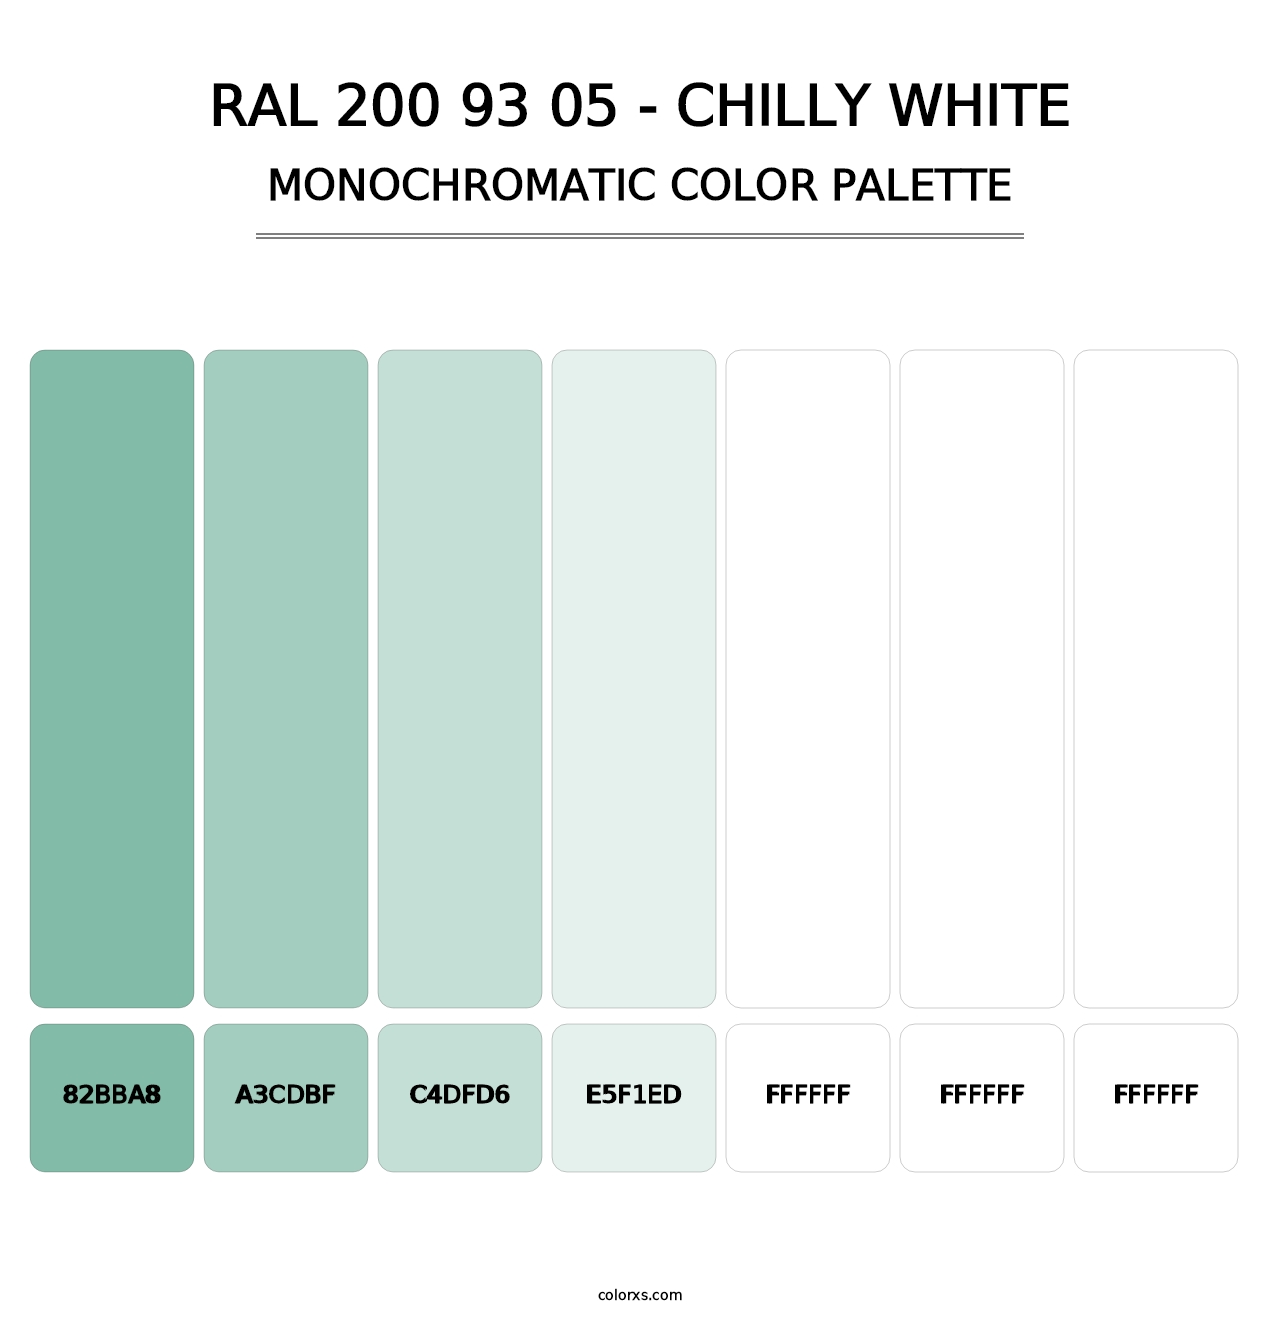 RAL 200 93 05 - Chilly White - Monochromatic Color Palette